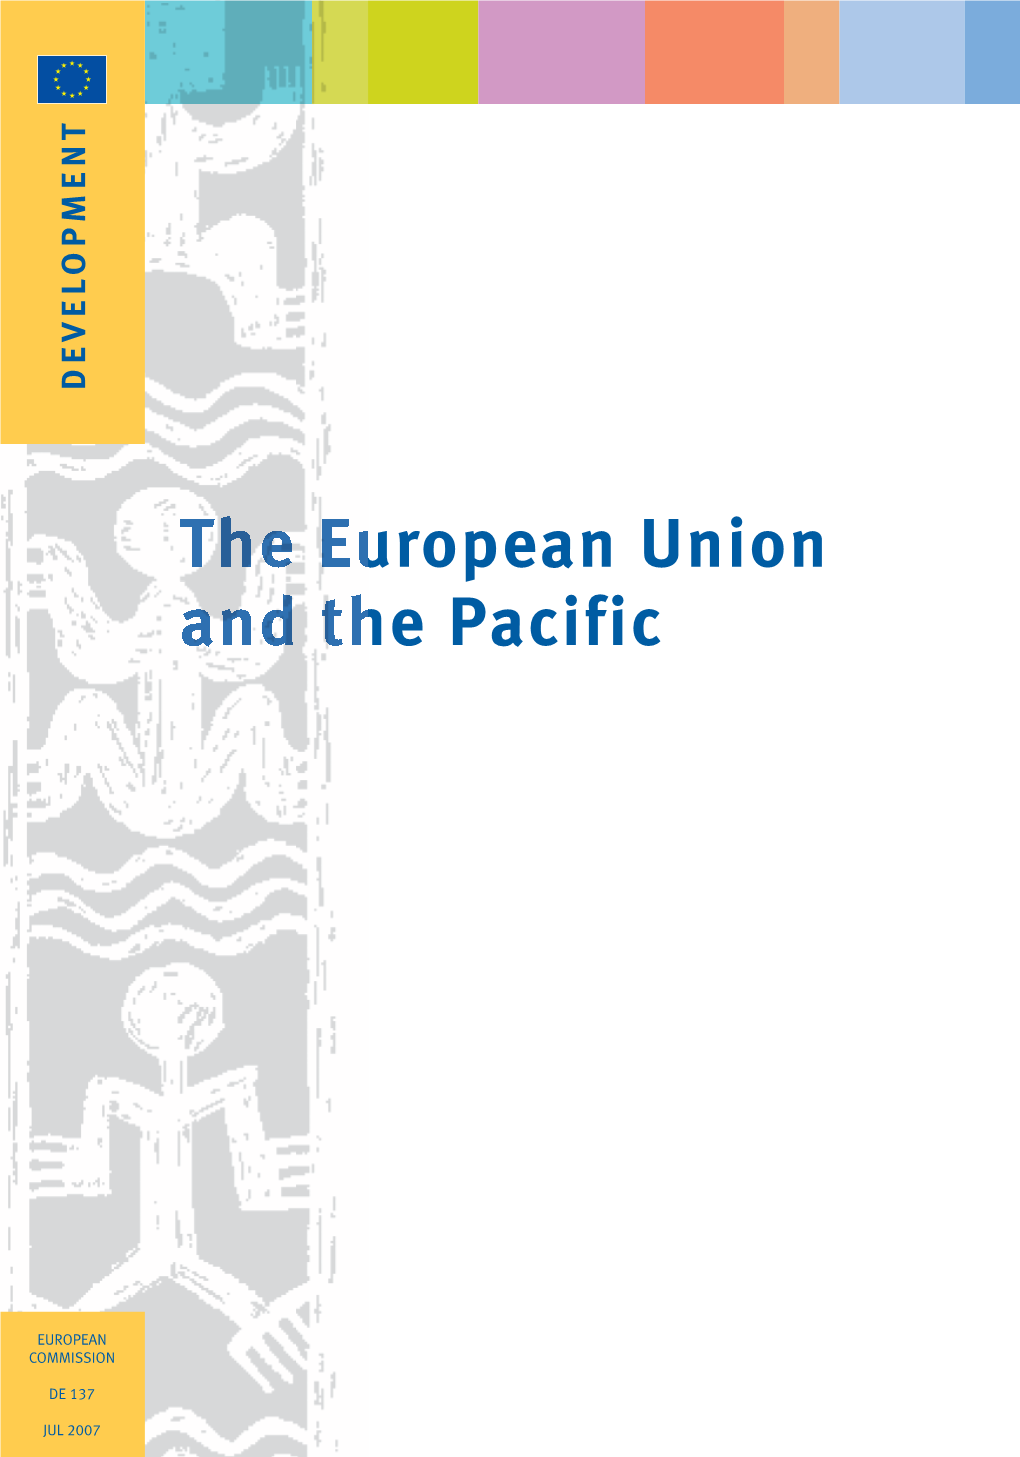 The European Union and the Pacific